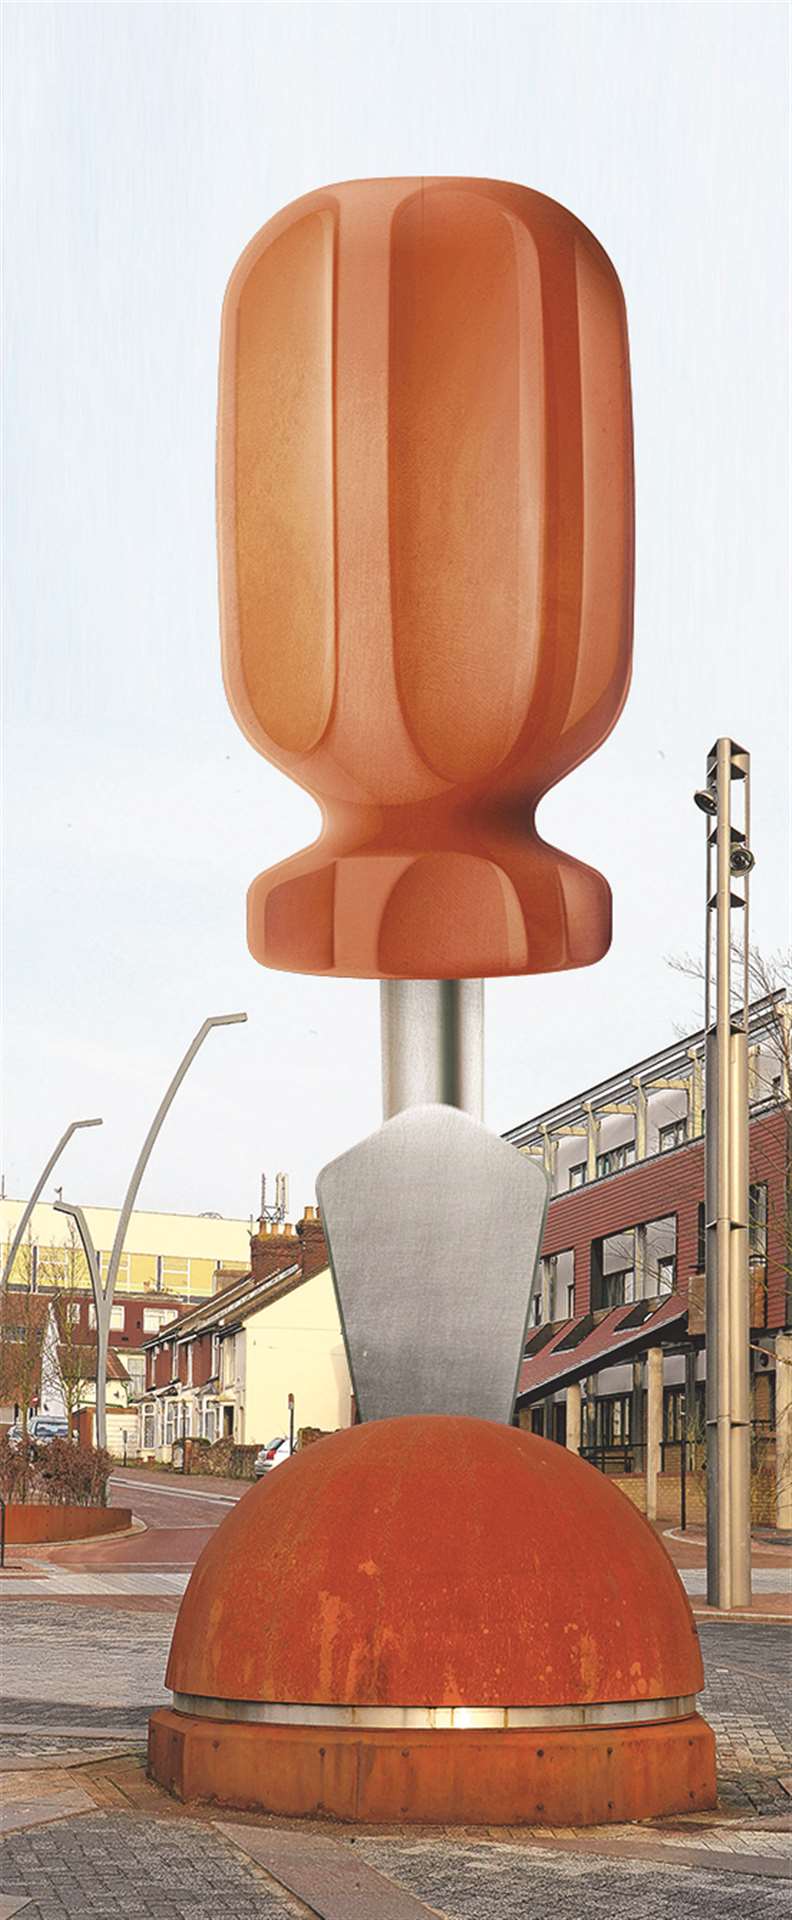 An artist's impression of how the Bolt would look with the addition of a giant screwdriver